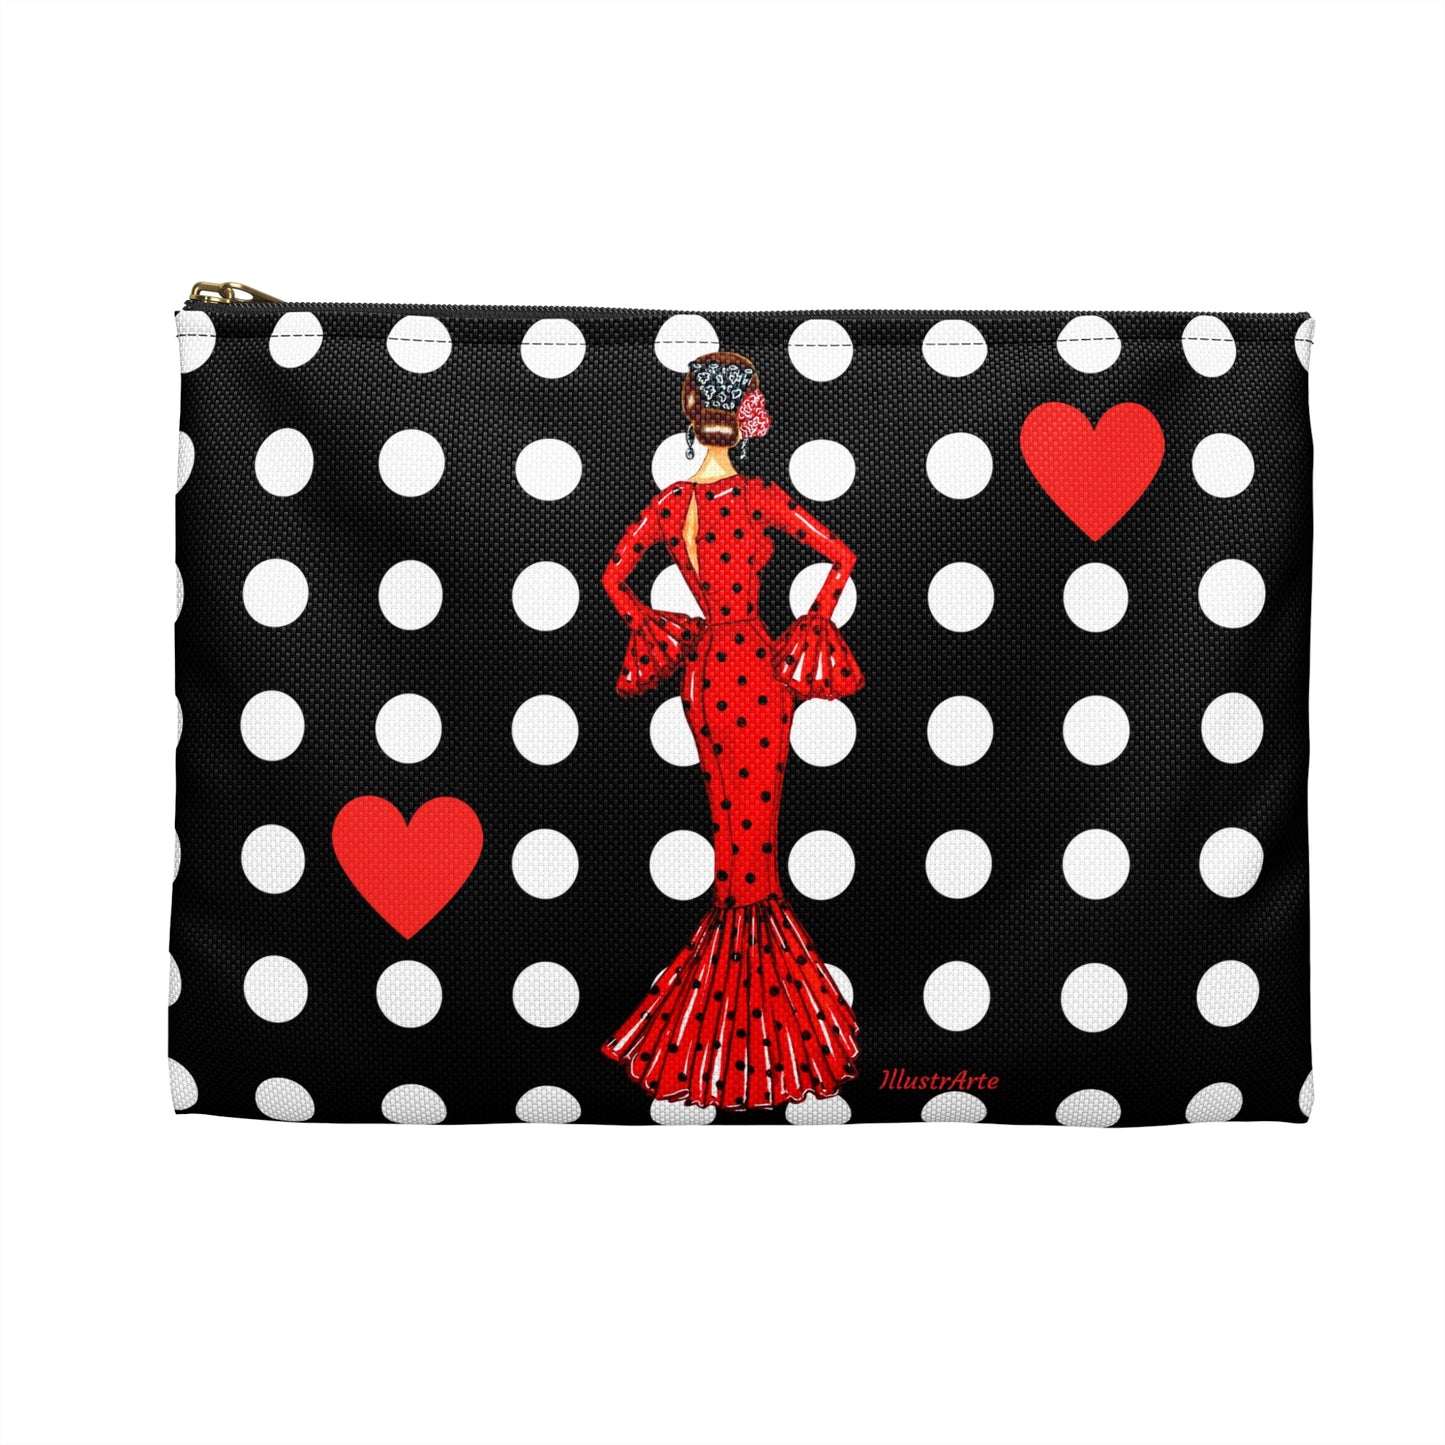 a black and white polka dot bag with a lady in a red dress